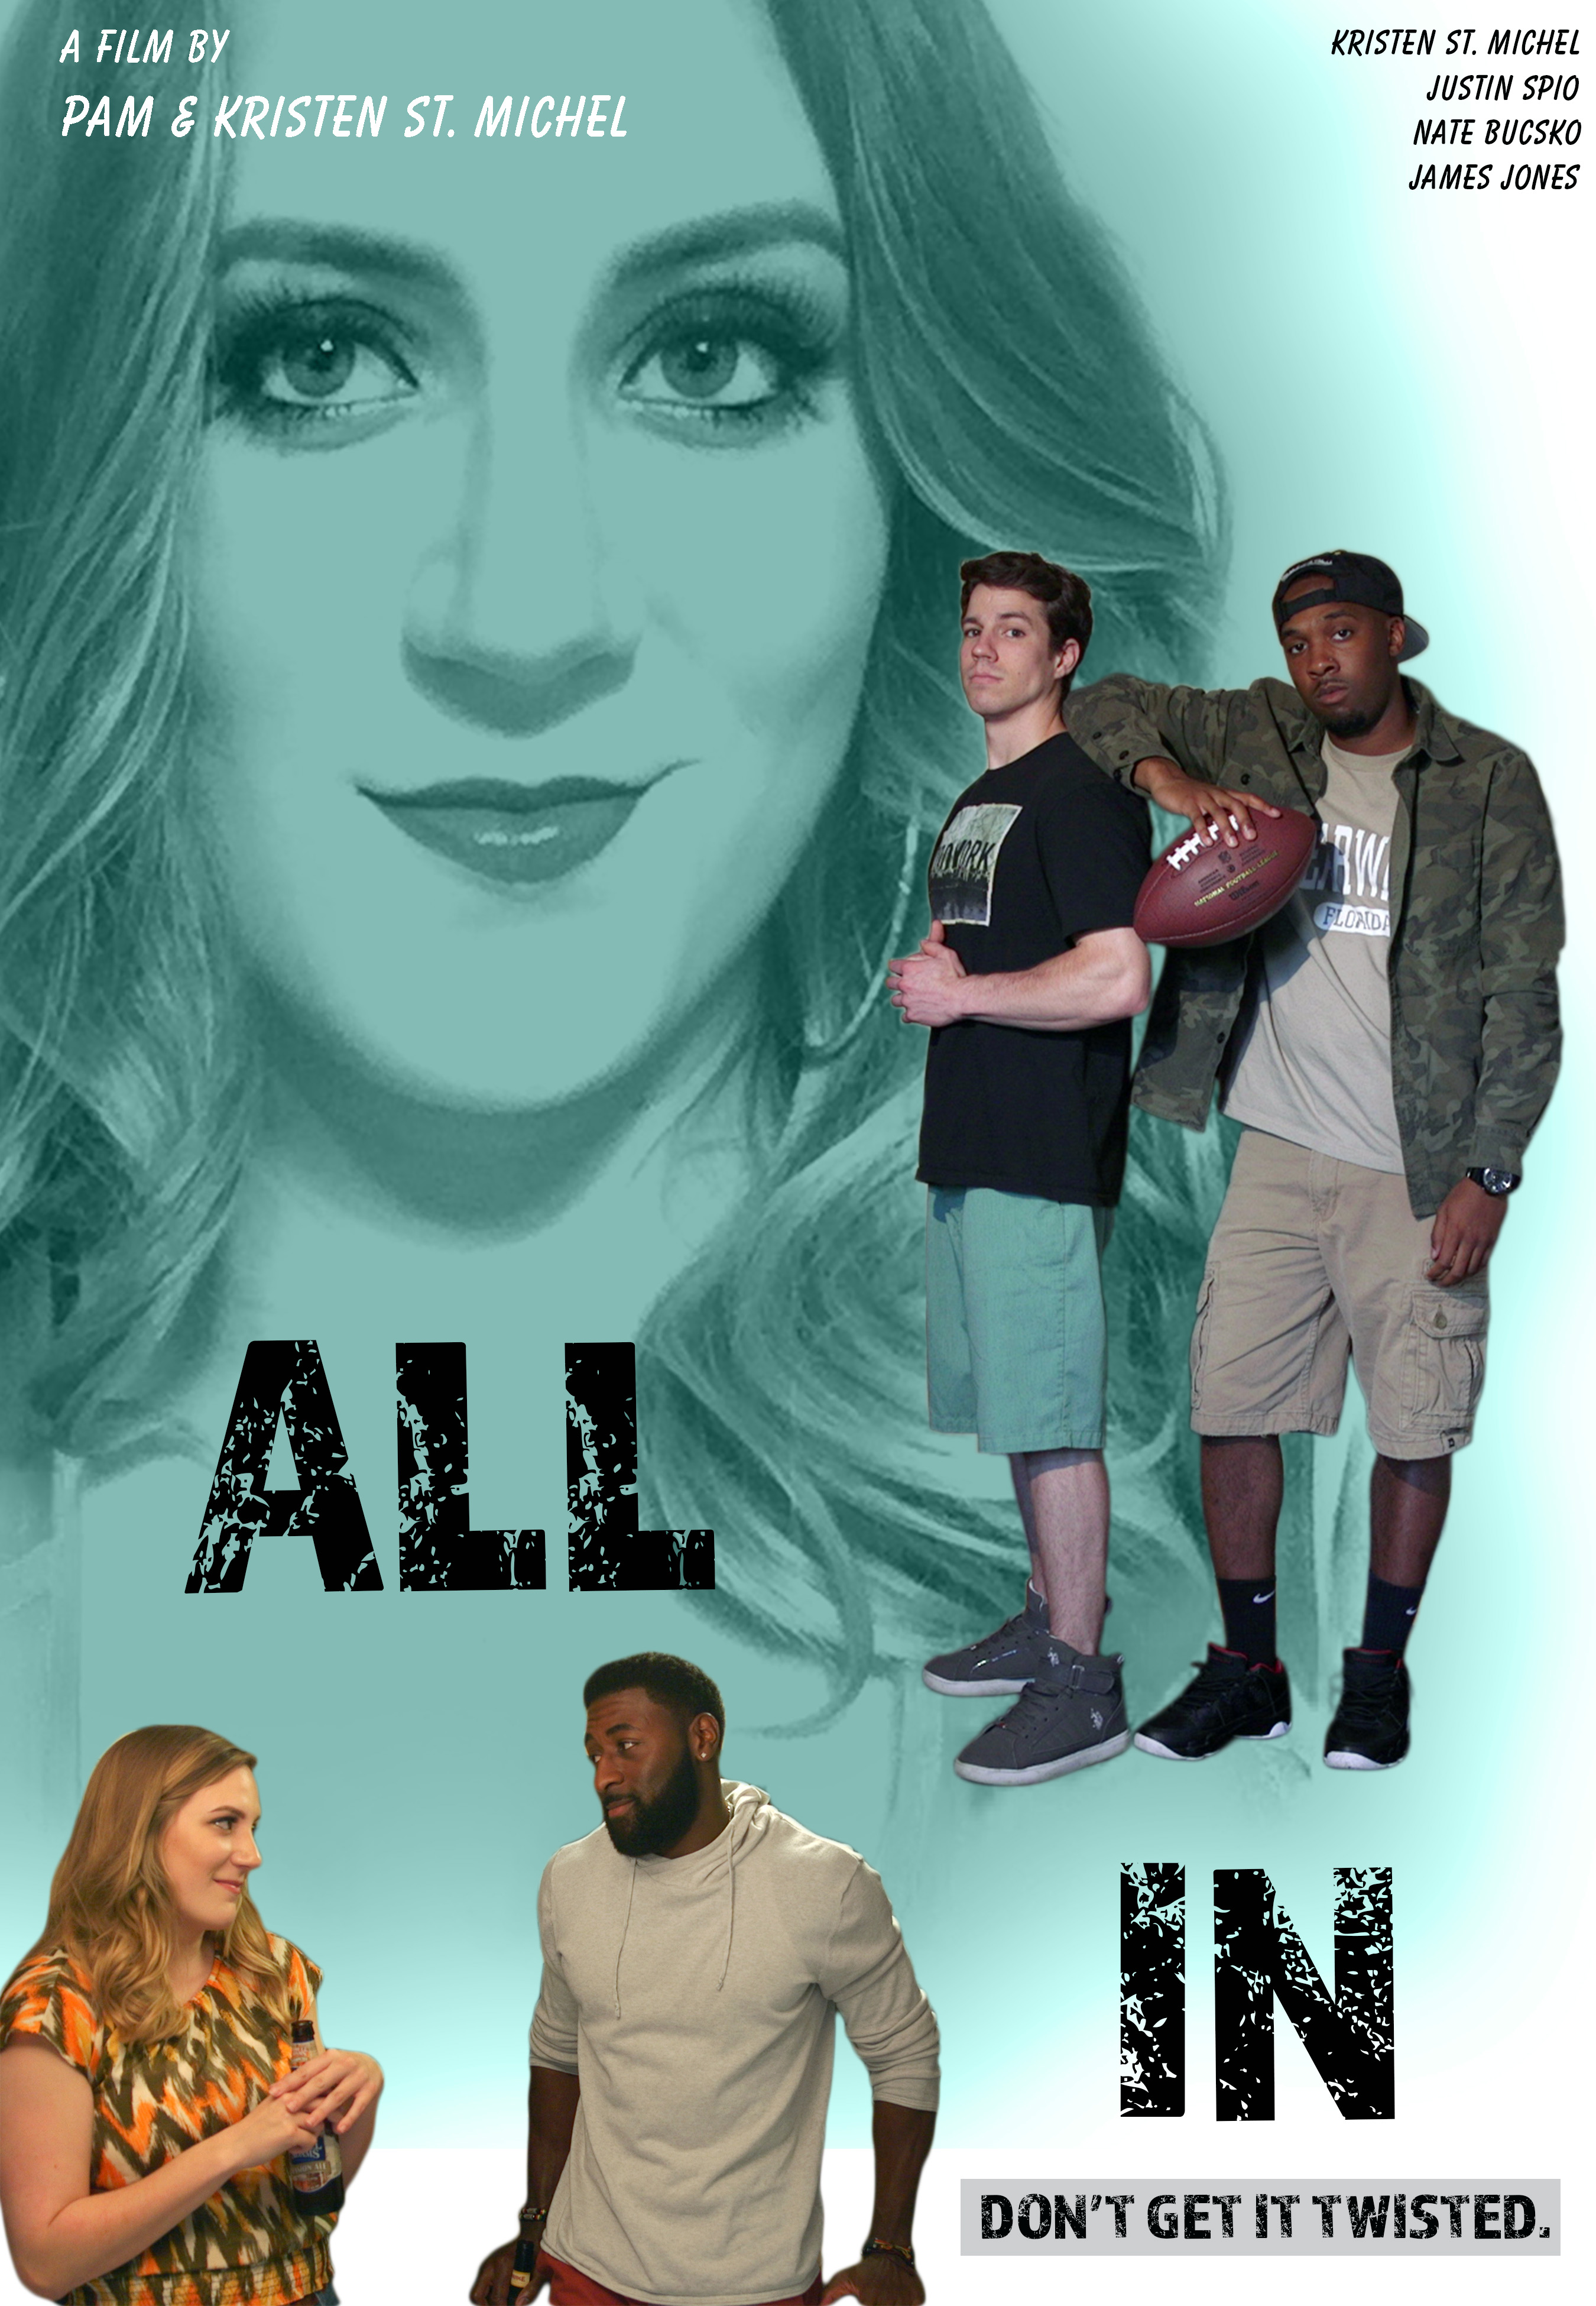 All In (2017)